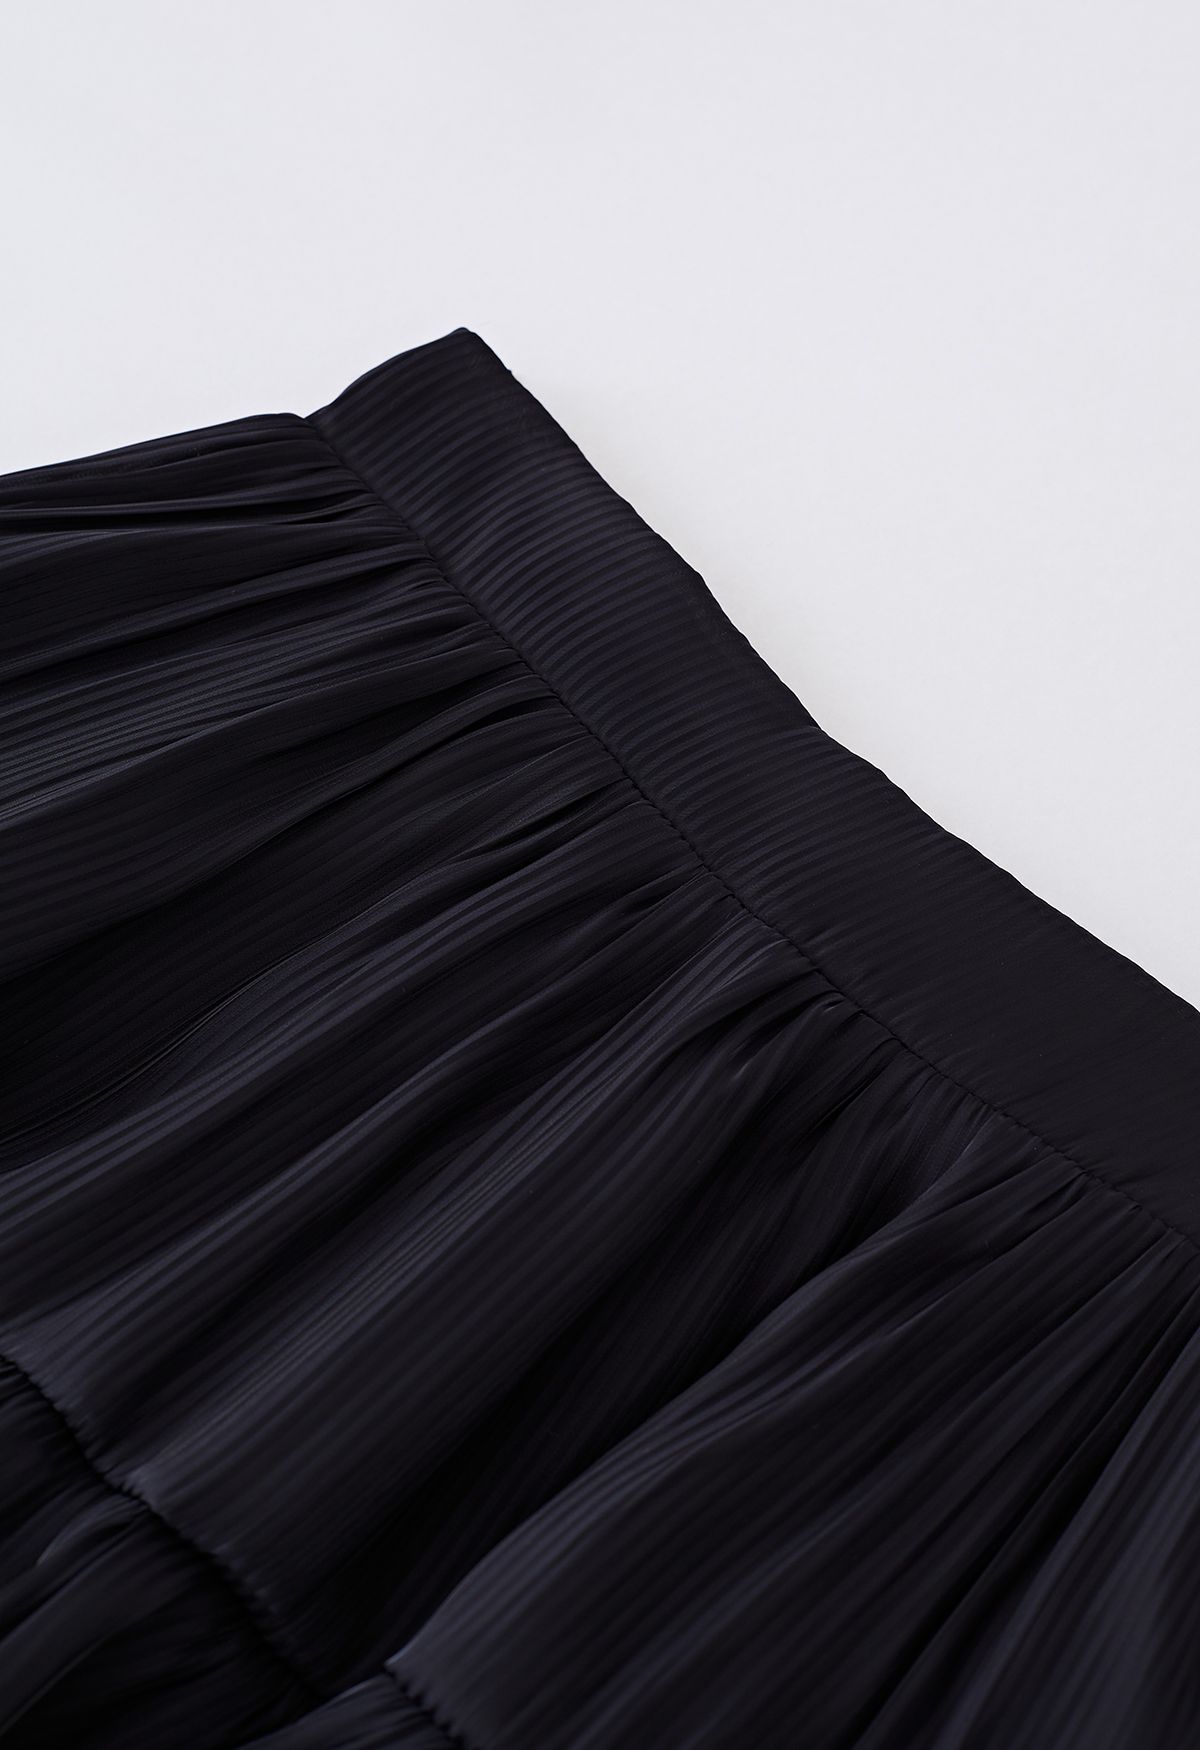 Glimmer Ruched Flare Mini Skirt in Black